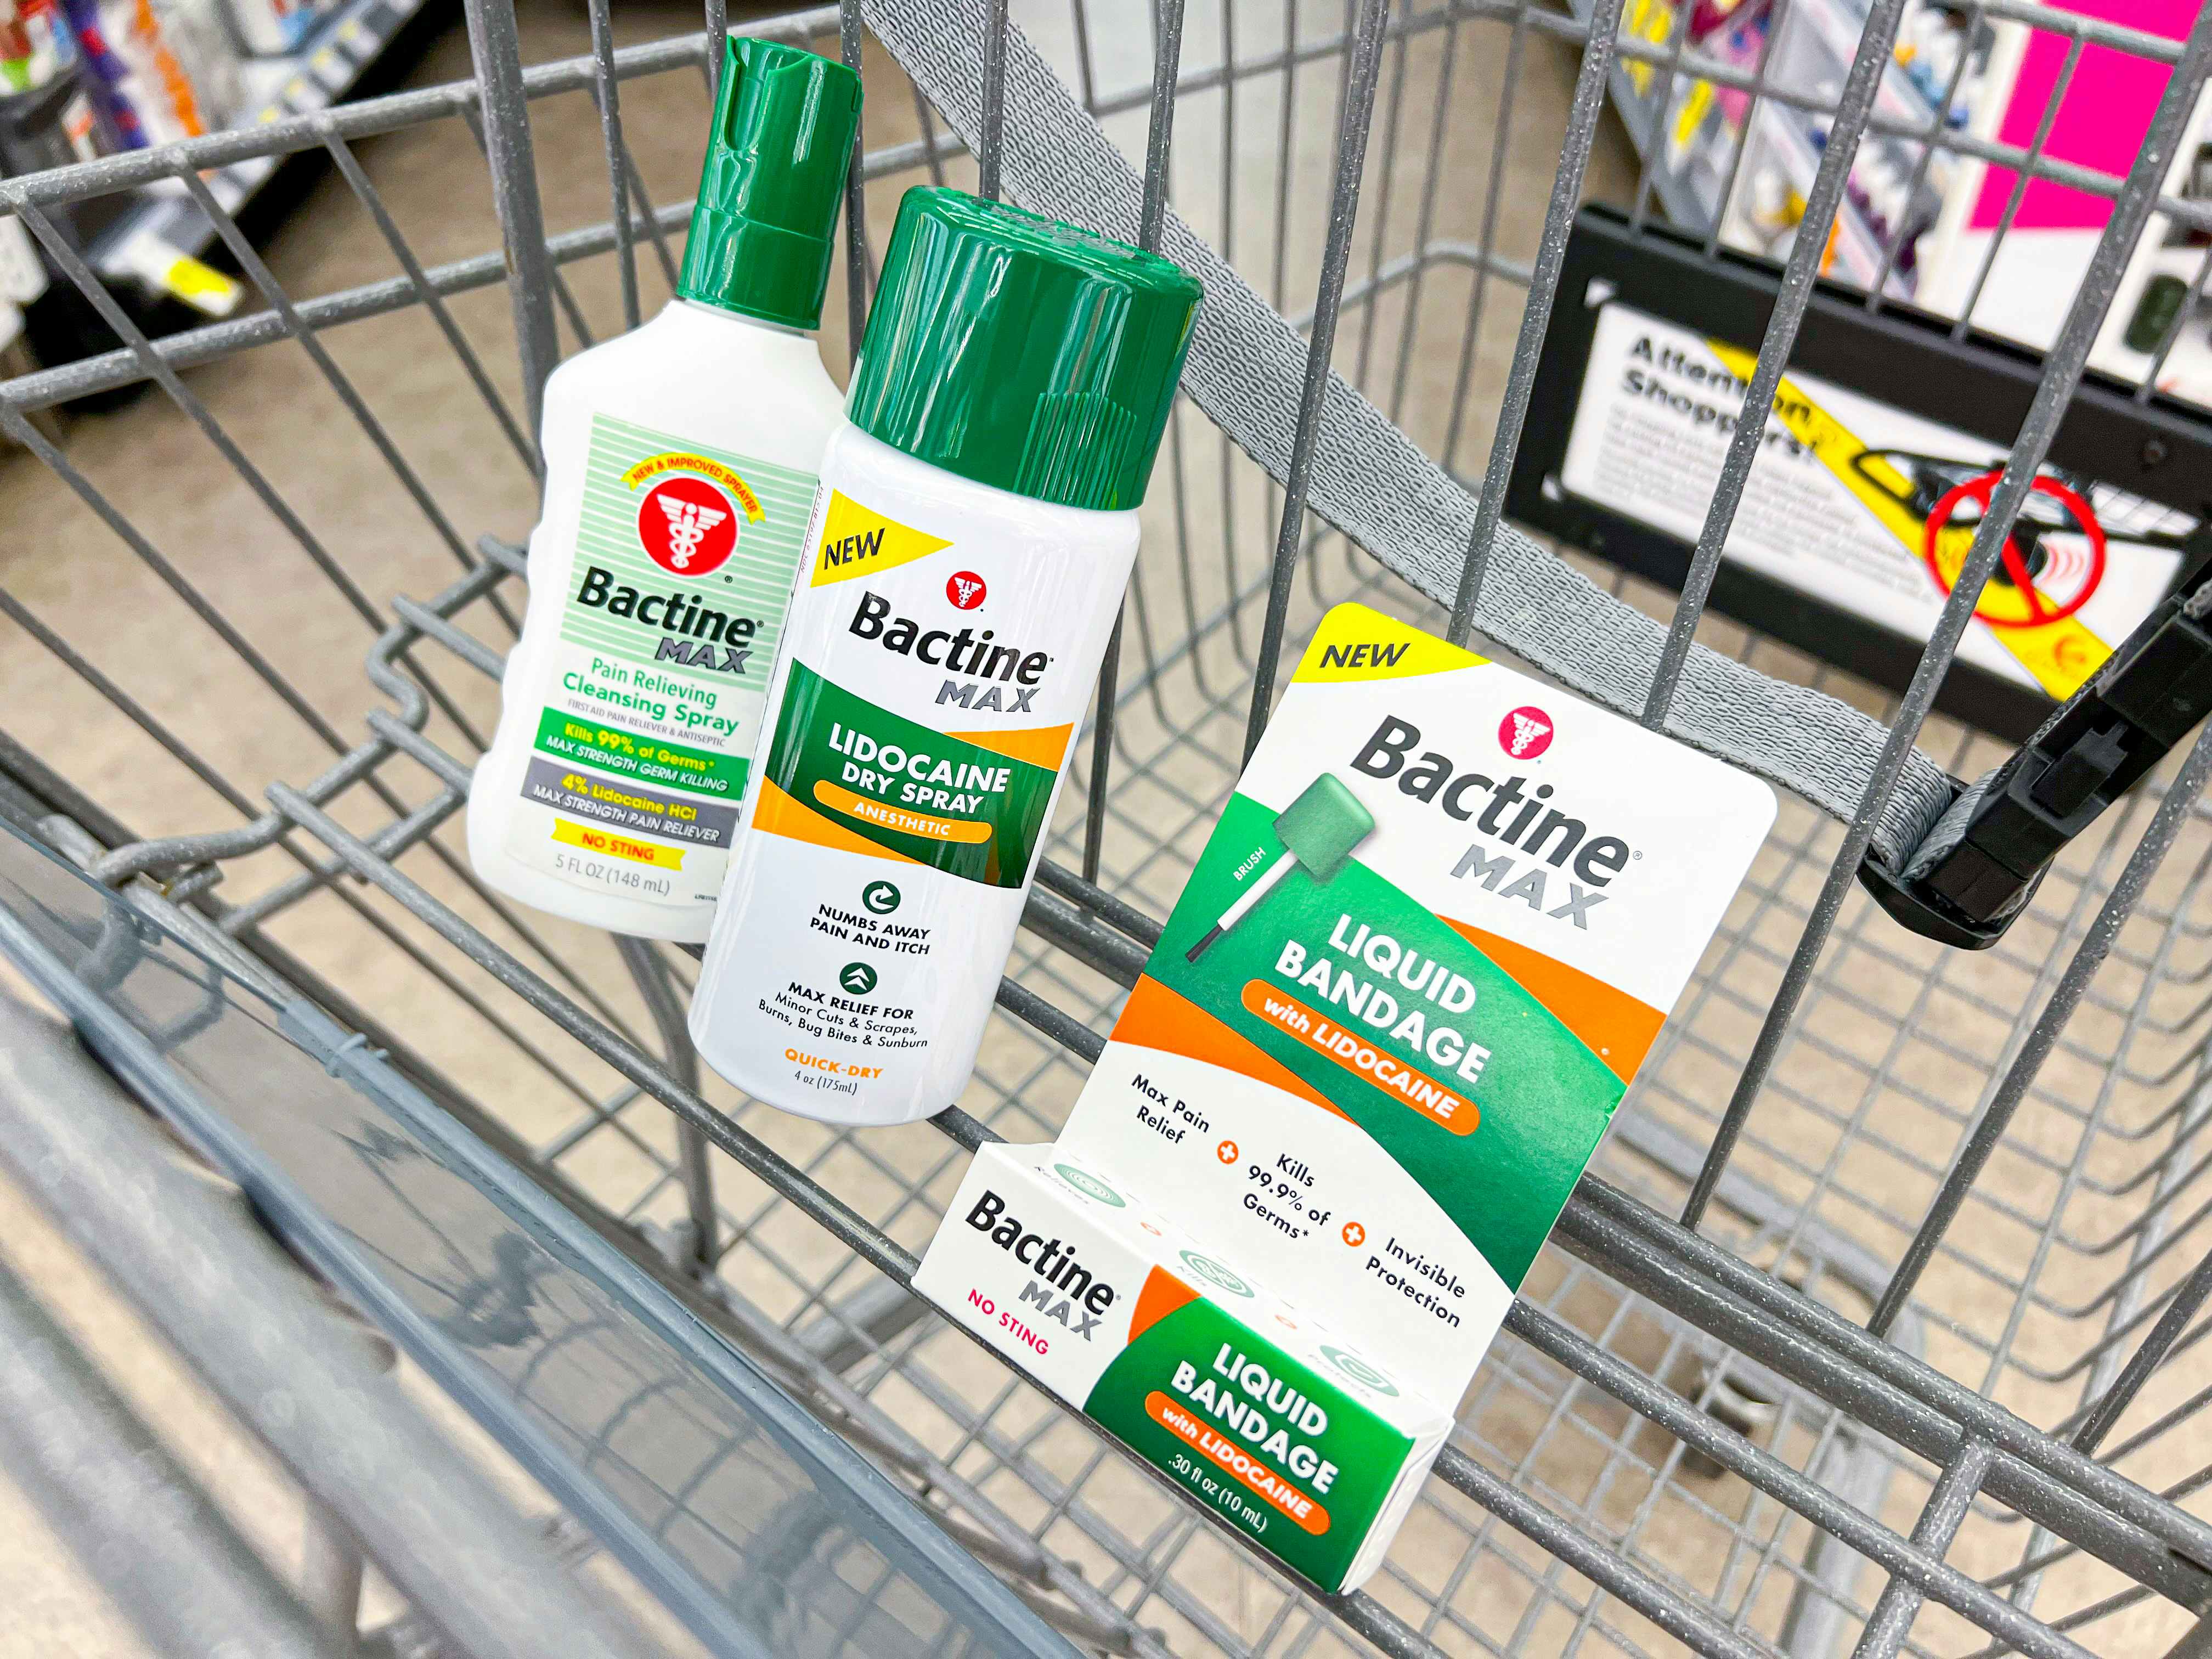 Bactine Max products in a Walgreens cart